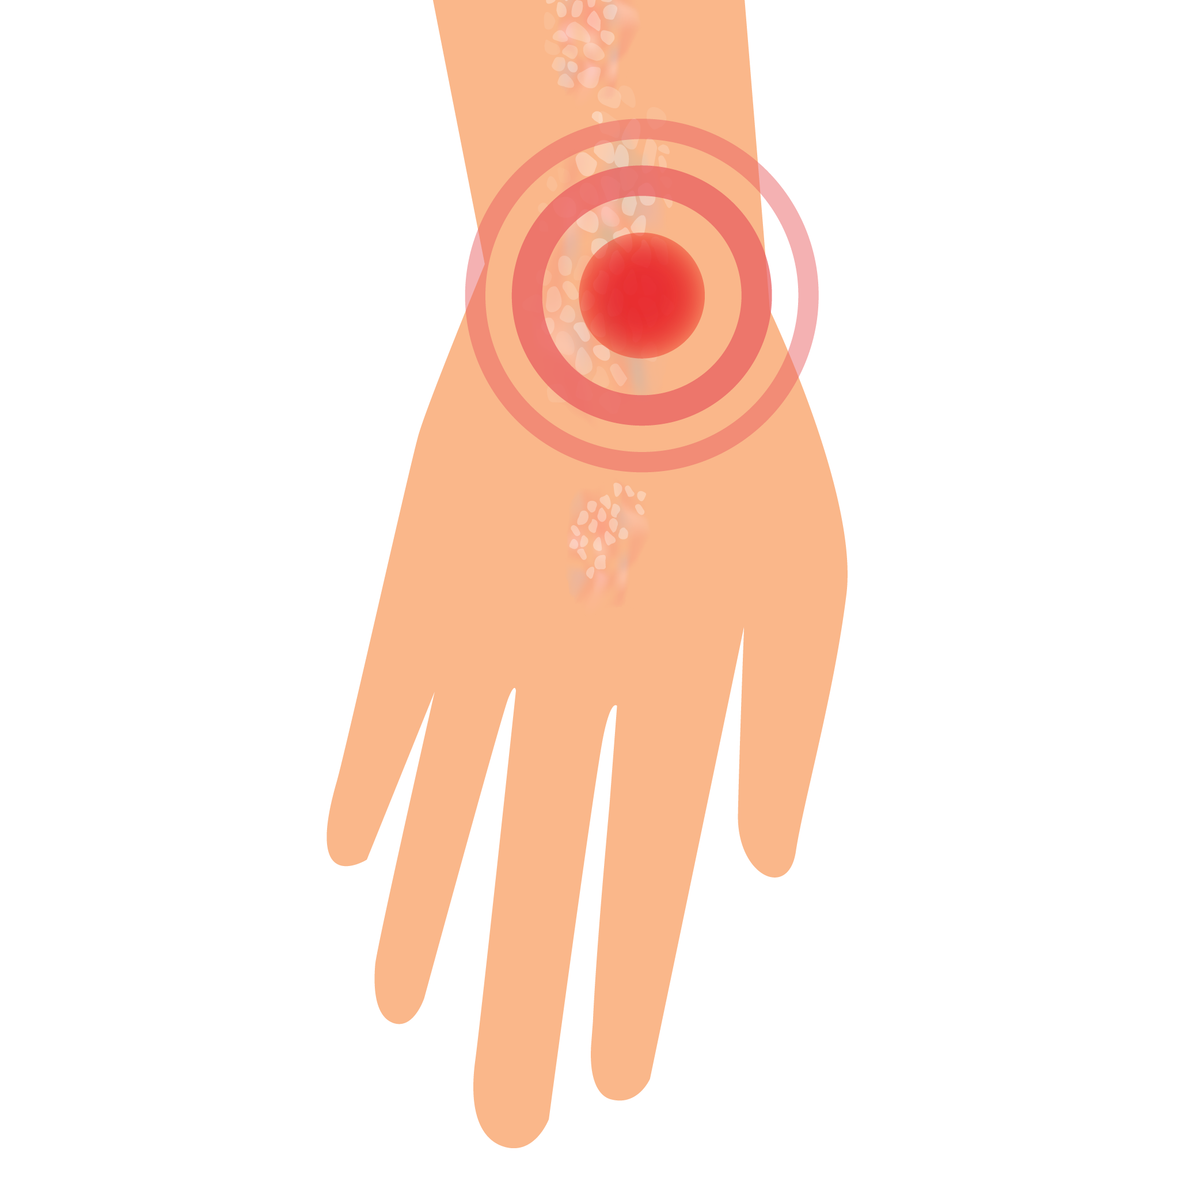 A hand graphic with red markings showing psoriasis